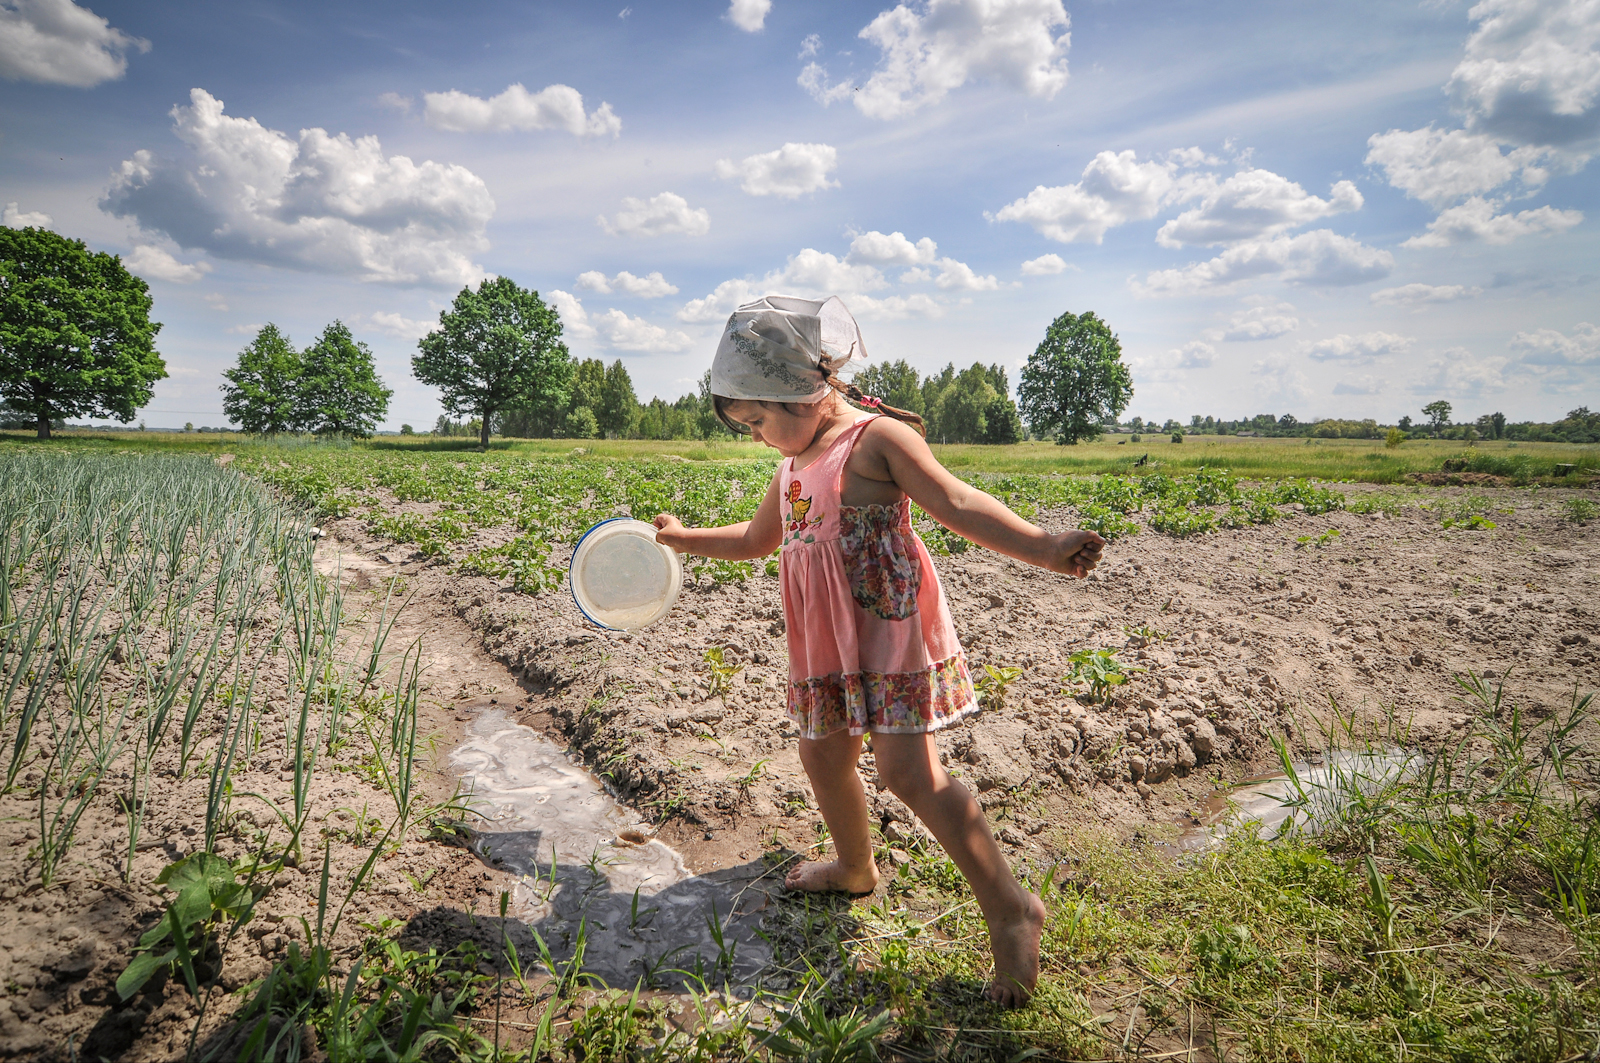 A young girl plays on her grandparents small farm near the border of the Exclusion Zone in Ukraine.